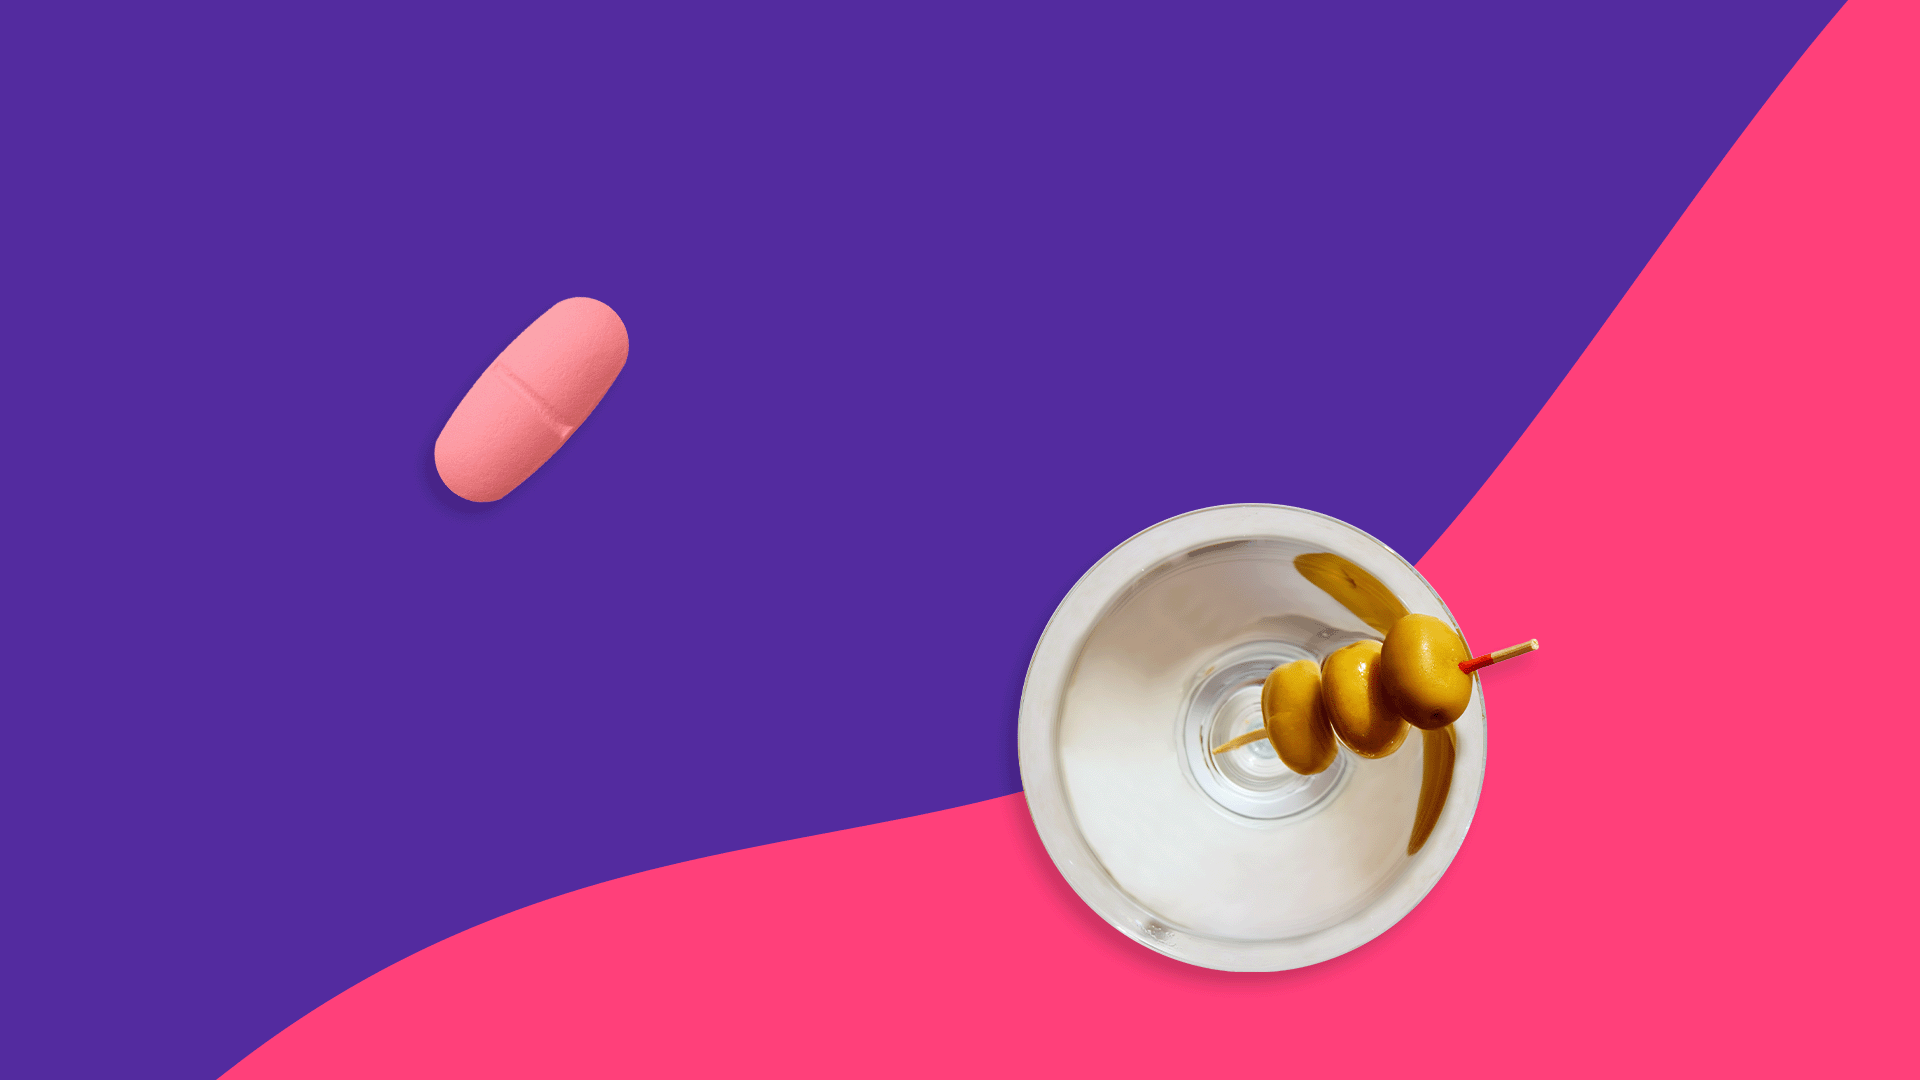 A pill and a cocktail - Biktarvy and alcohol